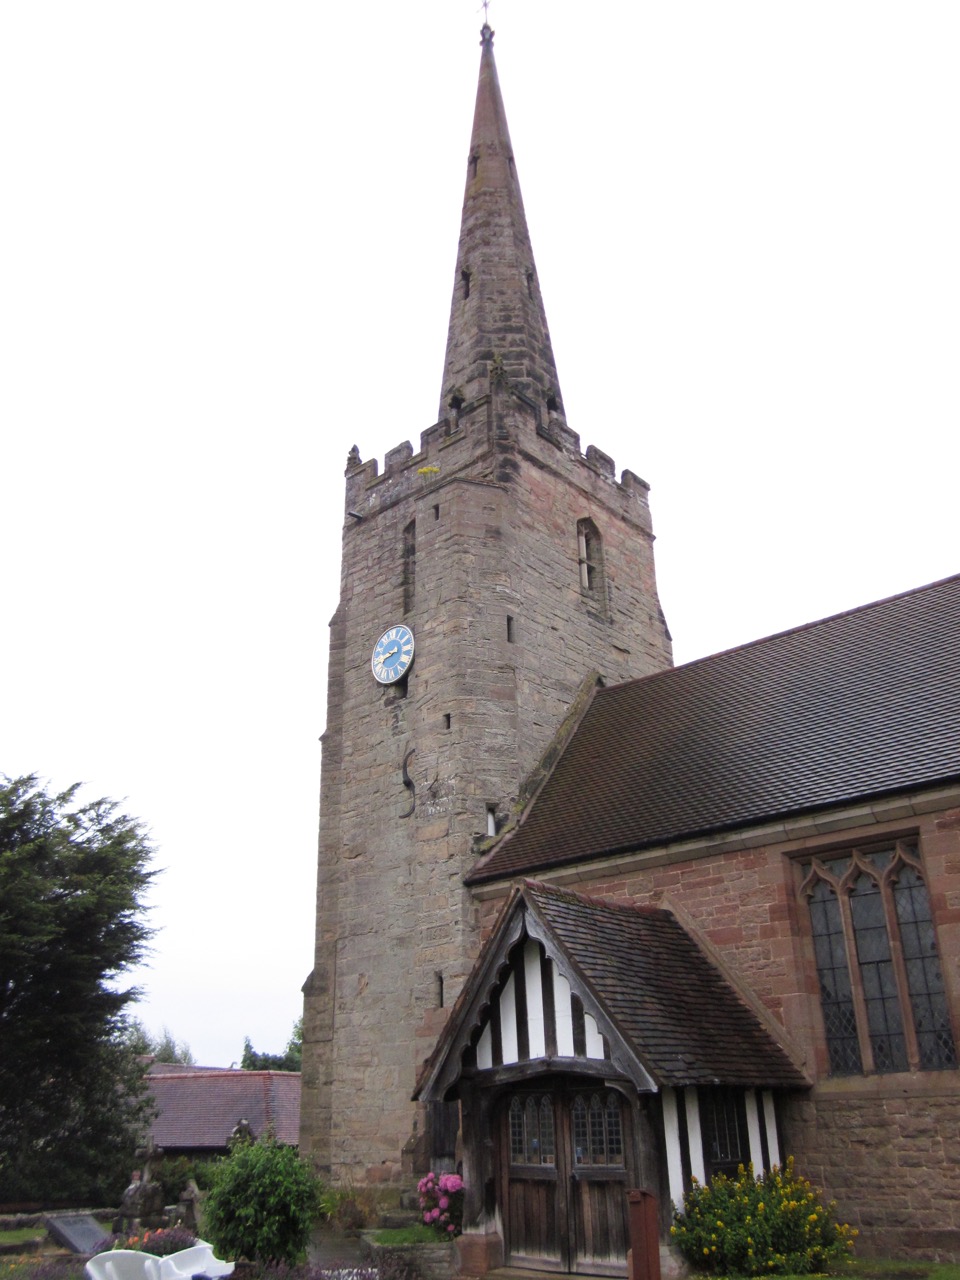 Tower and porch